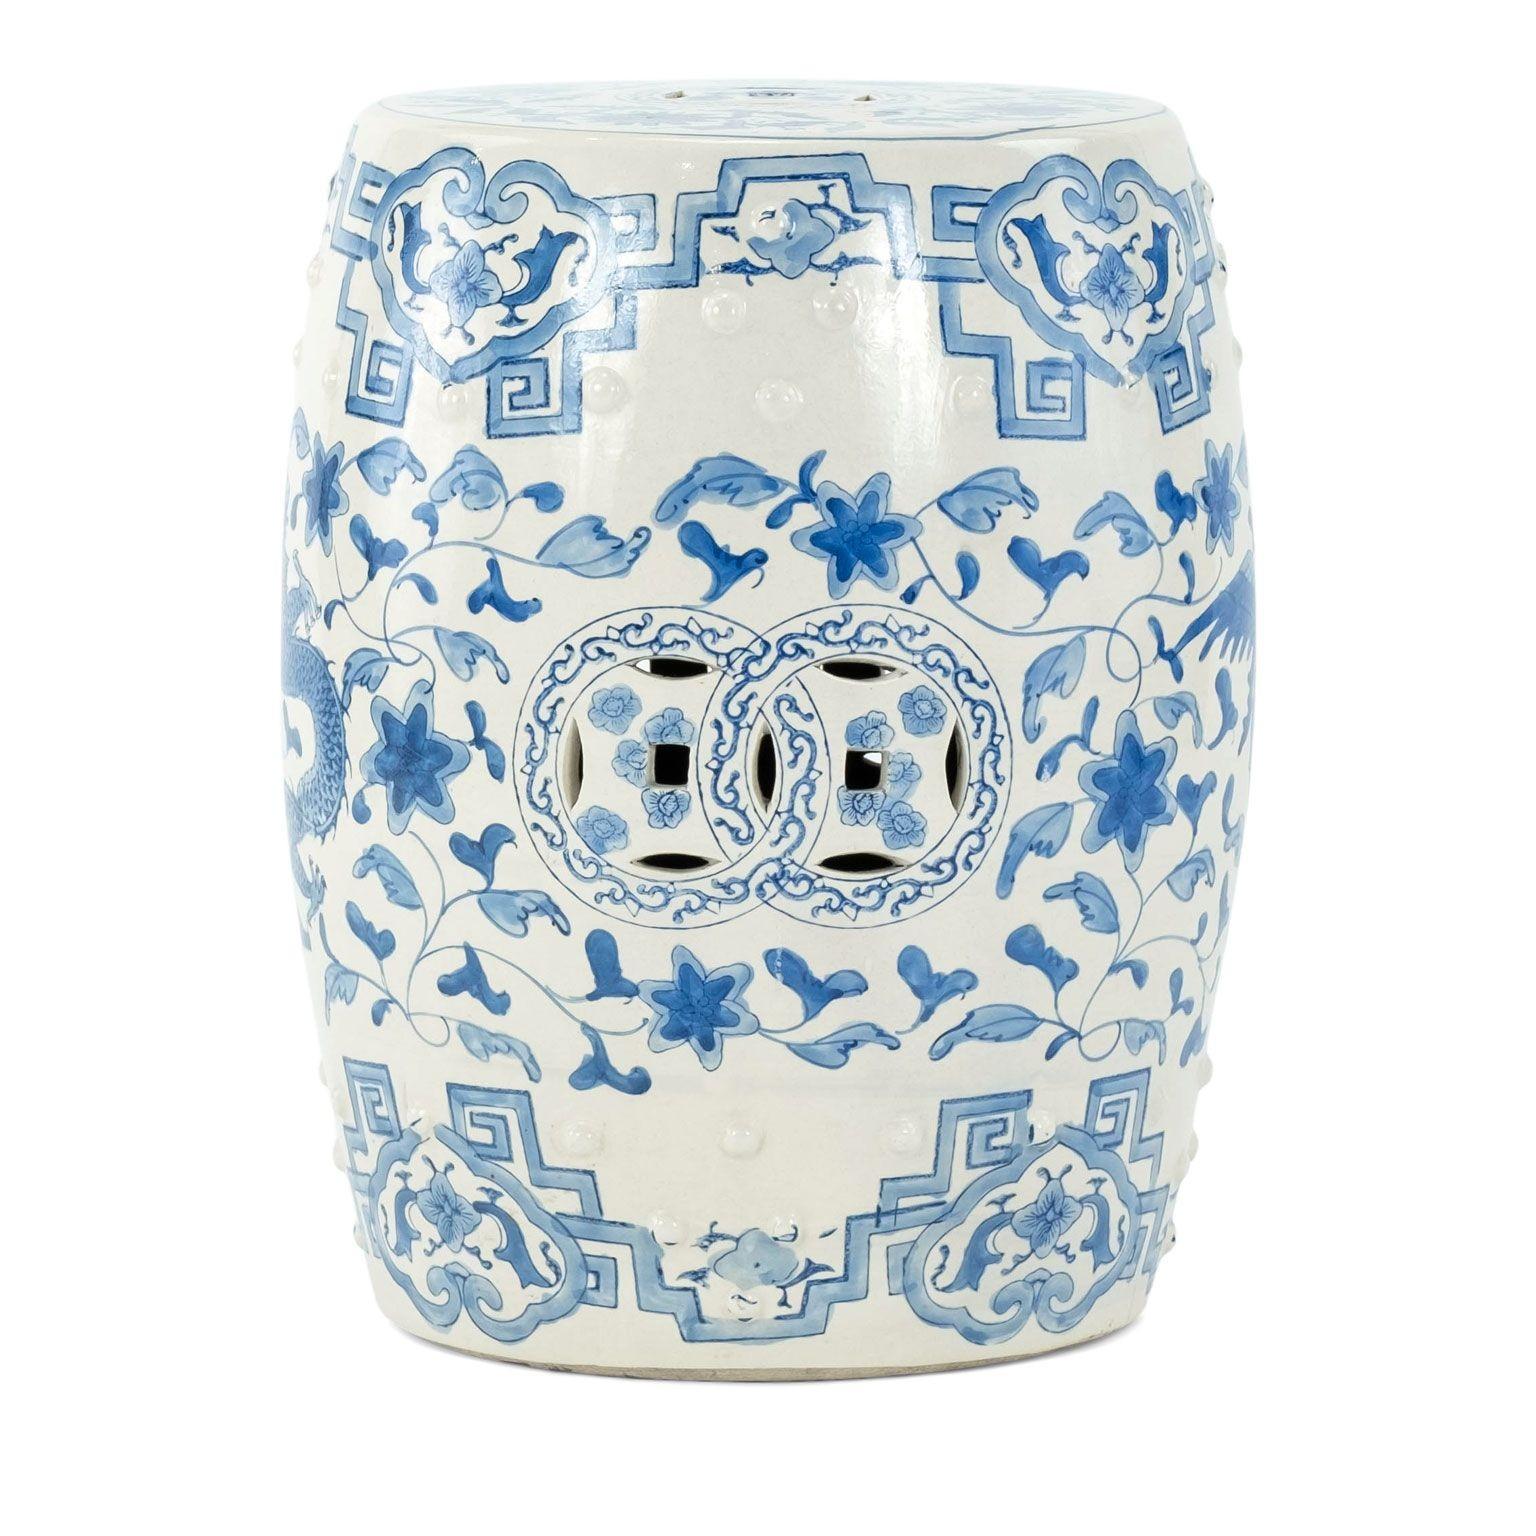 Blue and white porcelain garden seat, or stool, from China circa 1940-1959.